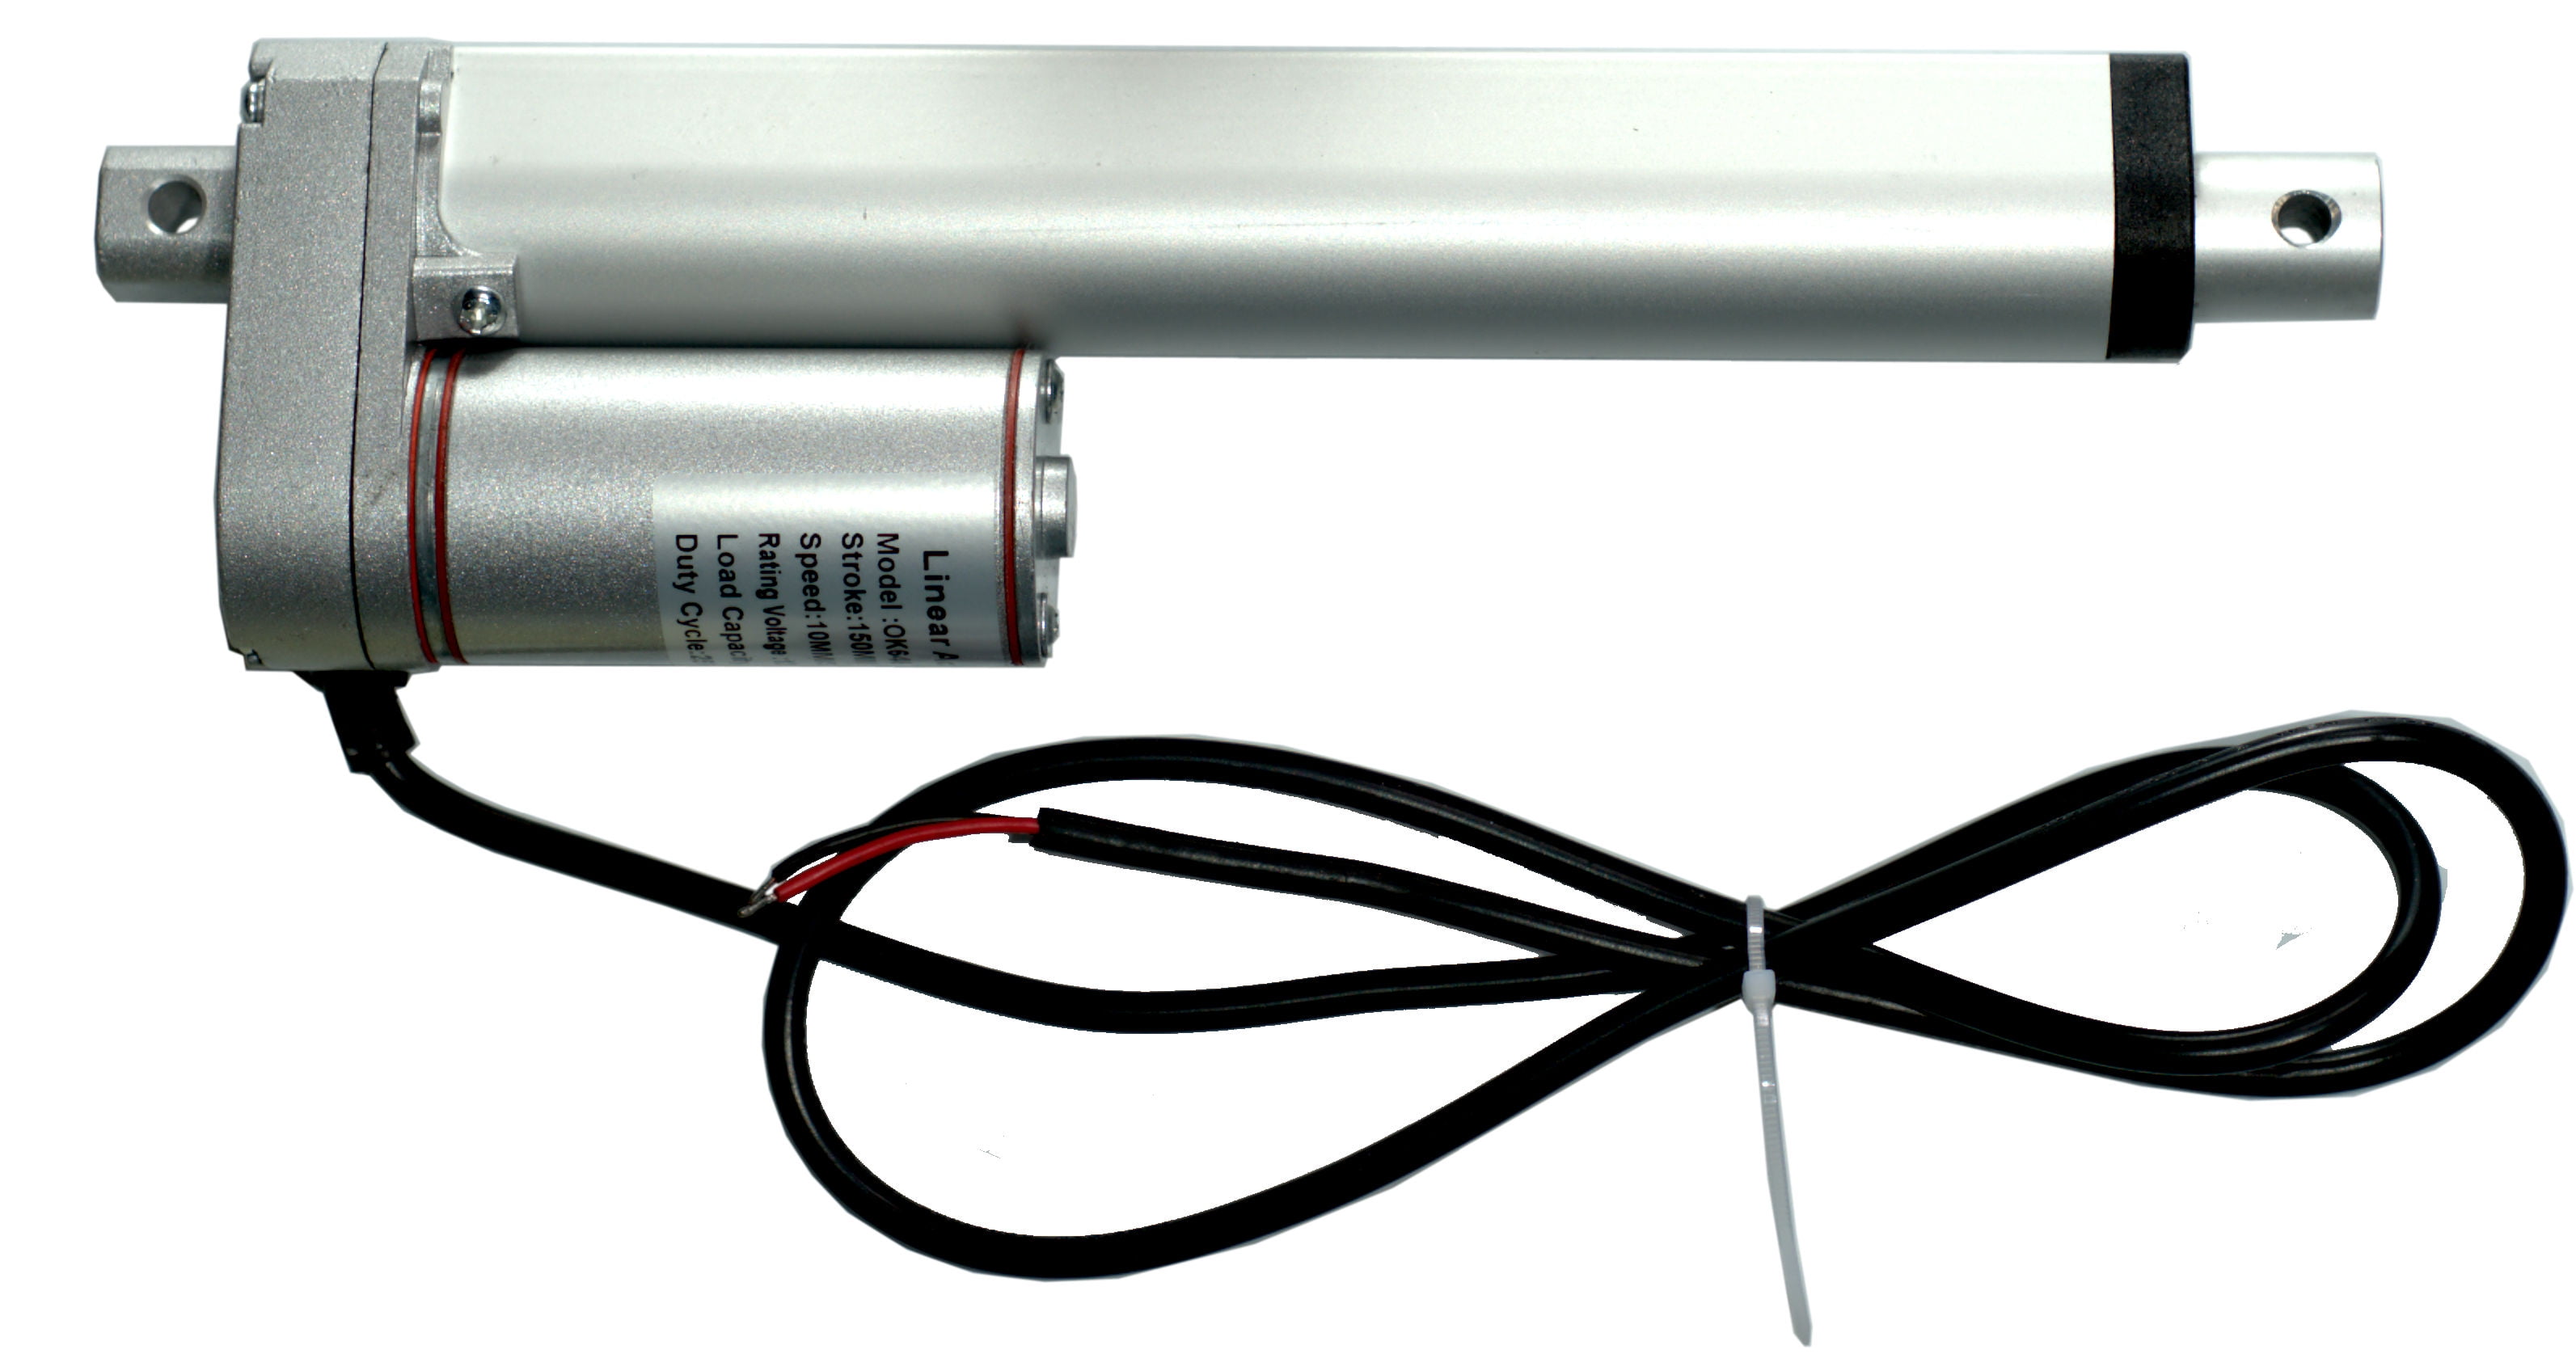 2"-18" Inch Stroke Linear Actuator 900N/225lbs Pound Max Lift 12V Volt DC Motor 